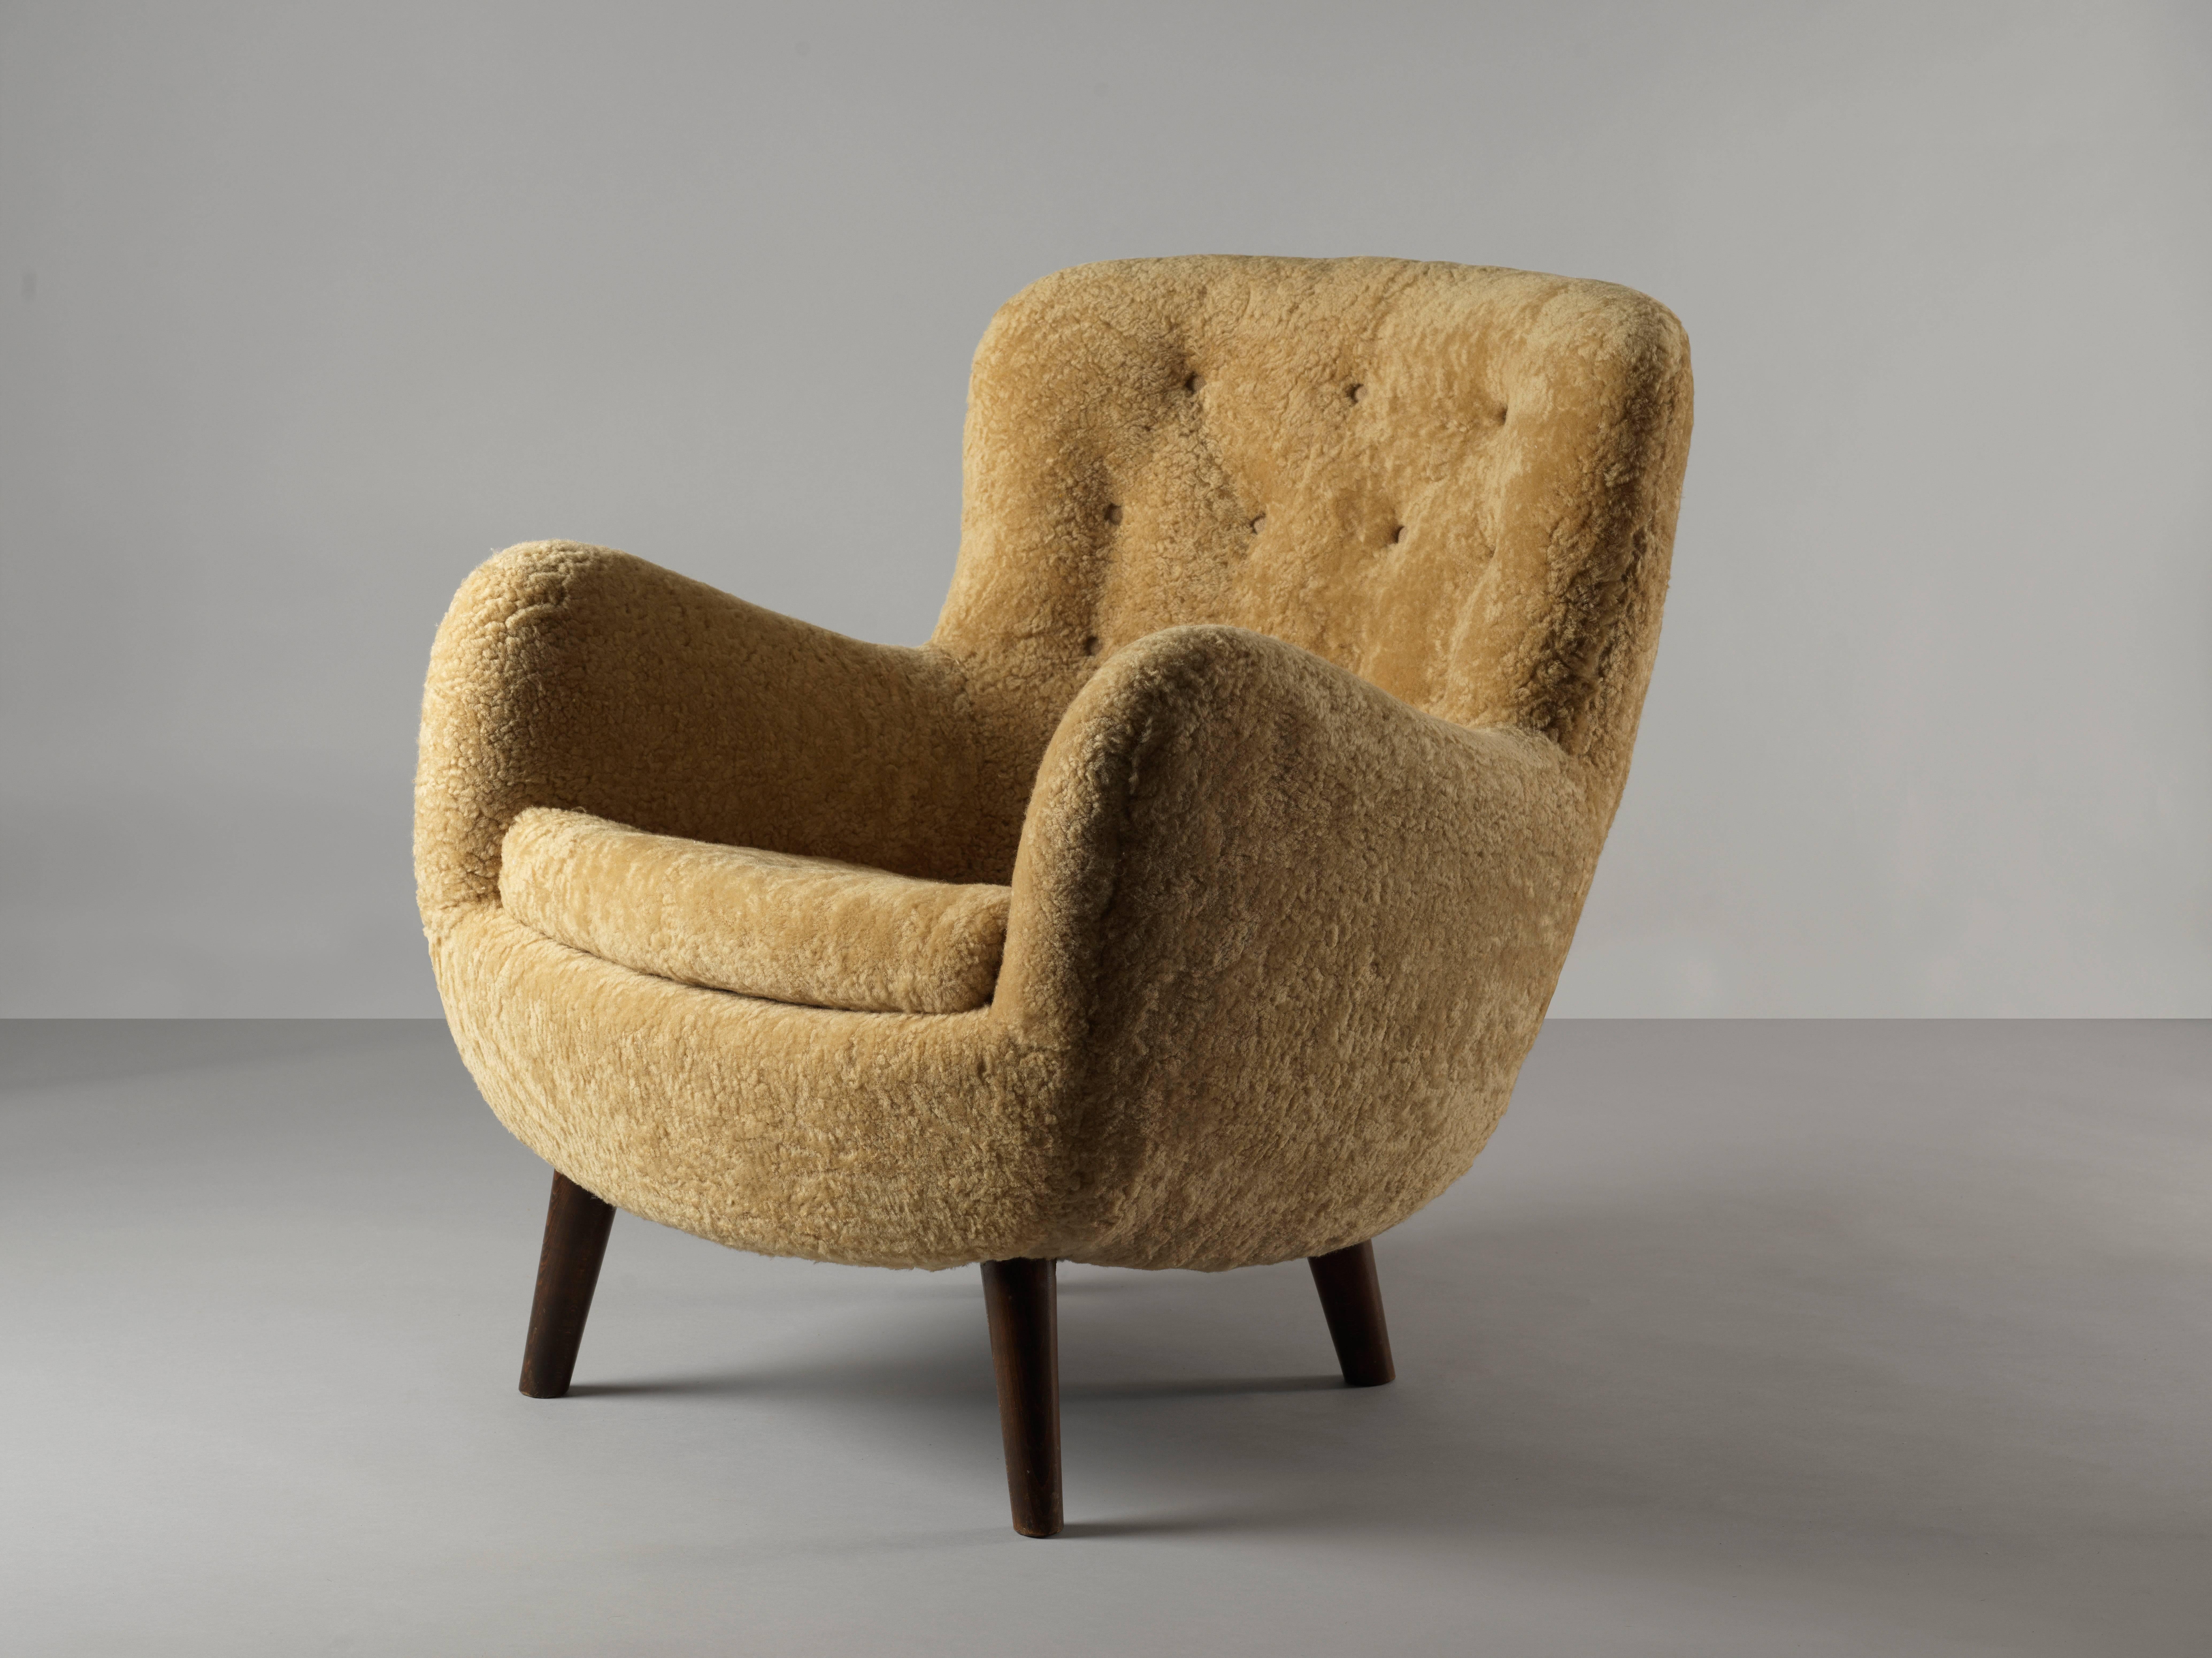 An example of early Danish modernism. Schlegel plays with the round form in a way that draws parallels to works such as the Egg chair that Jean Royere designed a decade later.

Upholstered in beige sheepskin contrasting dark wooden legs.

Frits